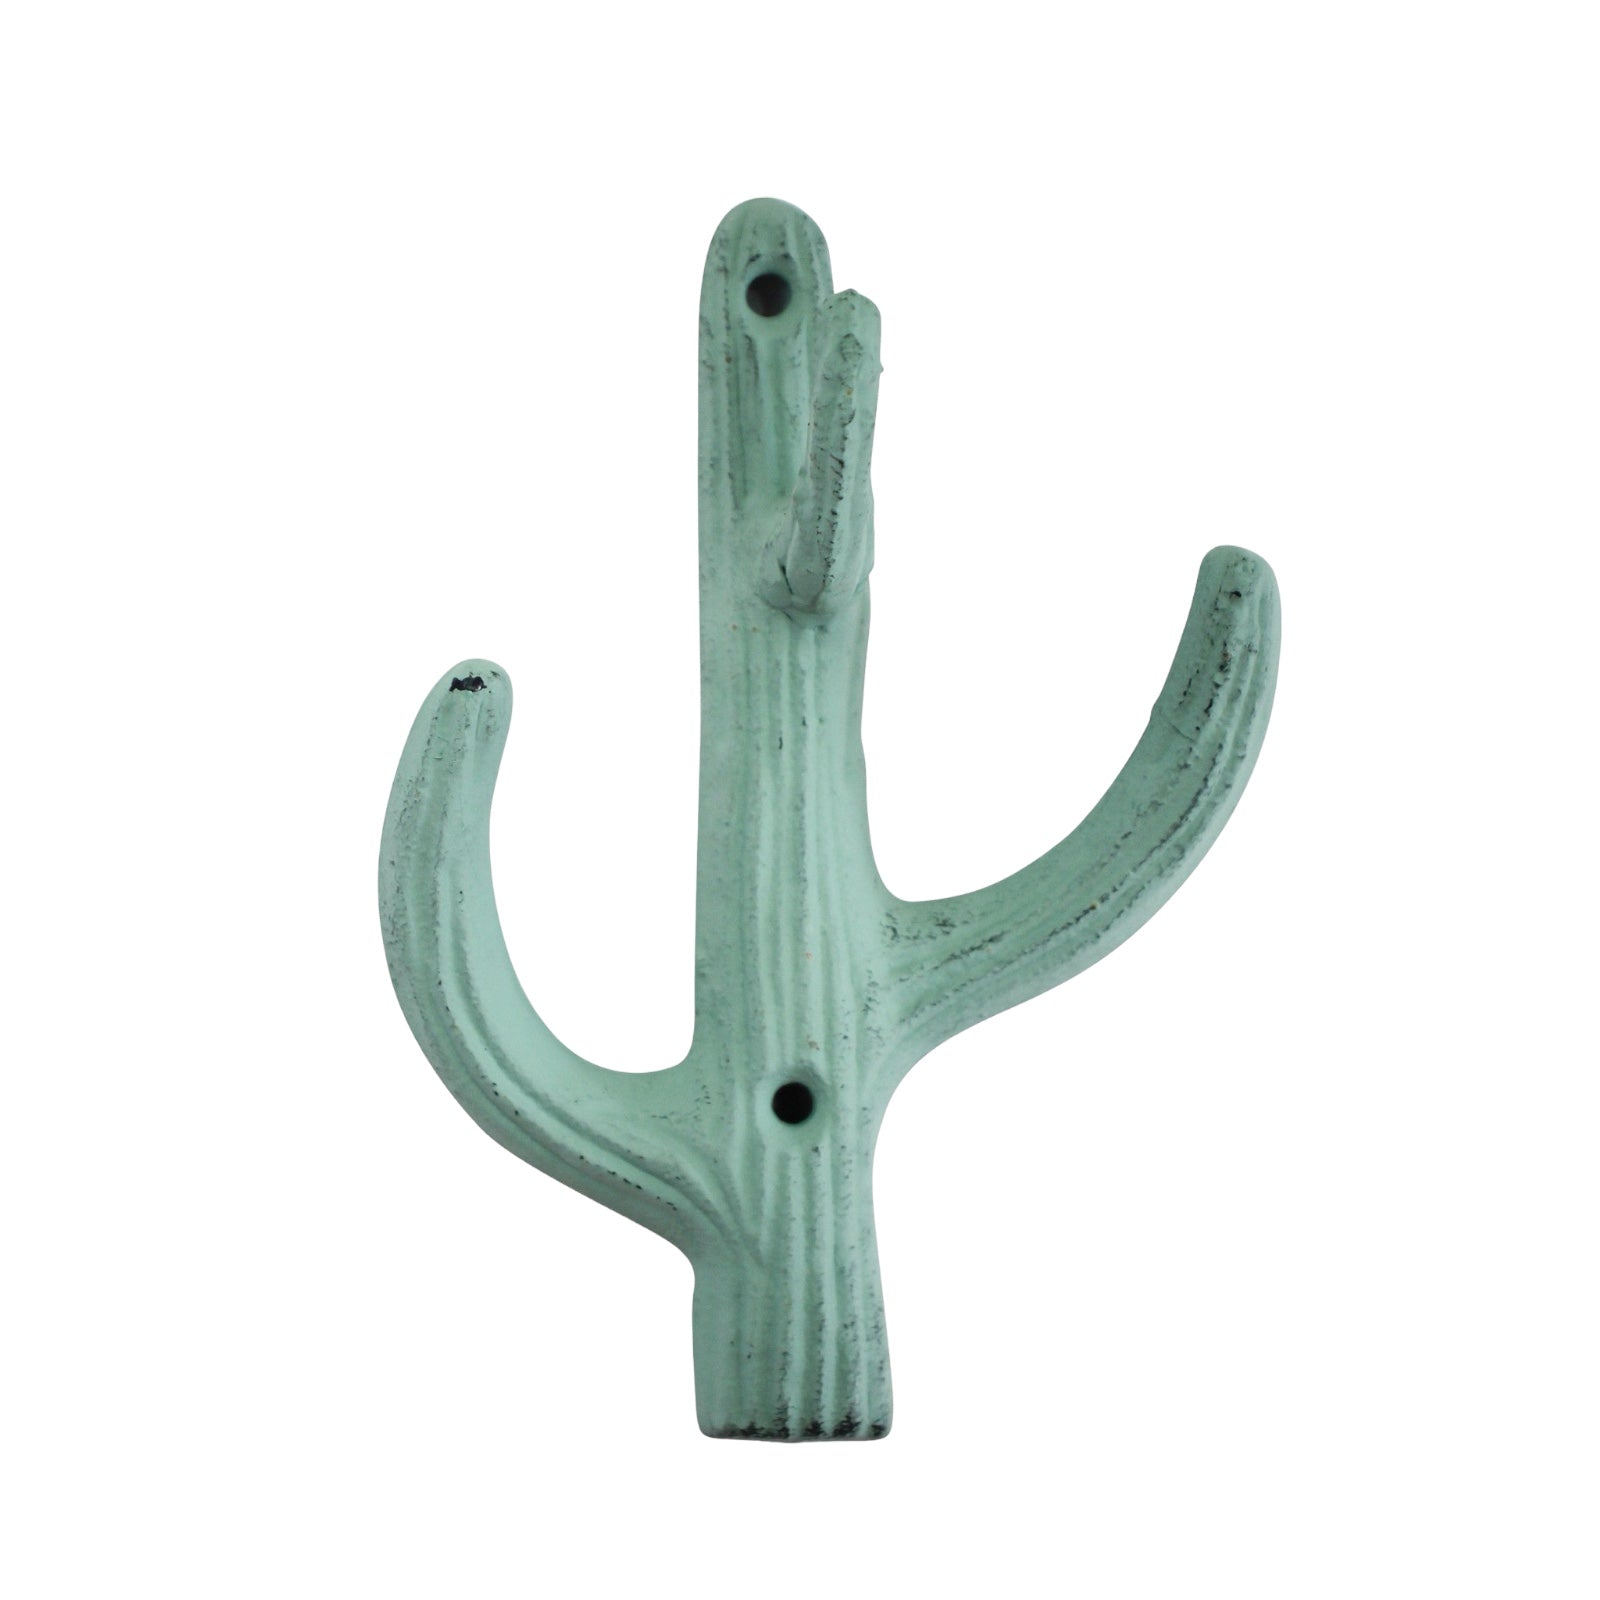 Hook Cactus Double Green Set of 2 - The Renmy Store Homewares & Gifts 